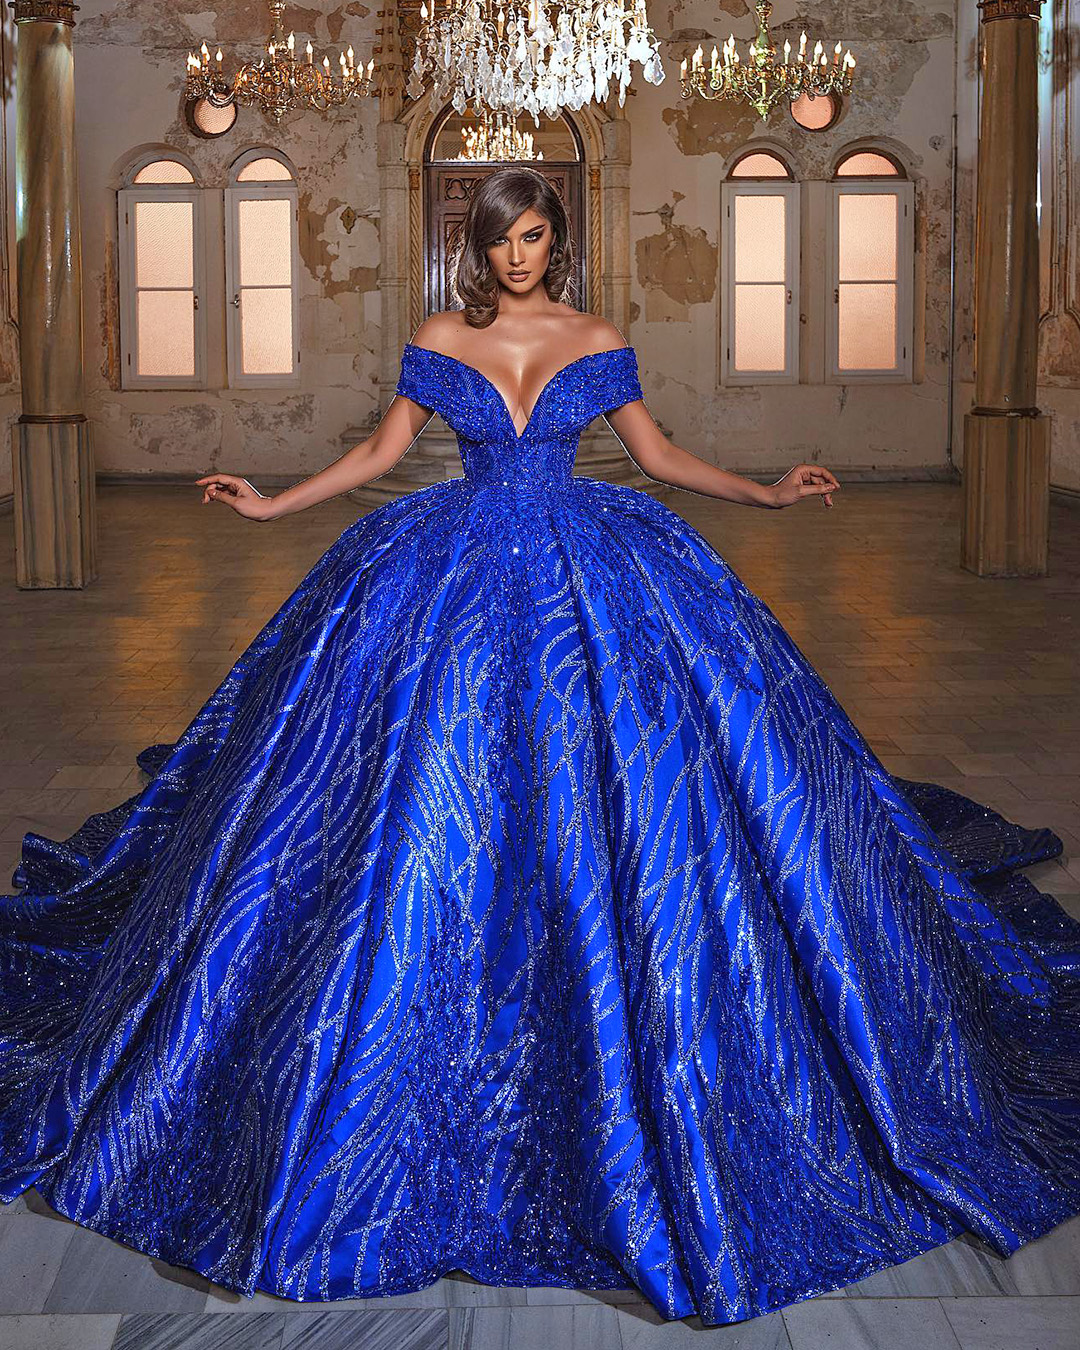 blue wedding dresses gown navy off the shoulder royal saidmhamadofficial